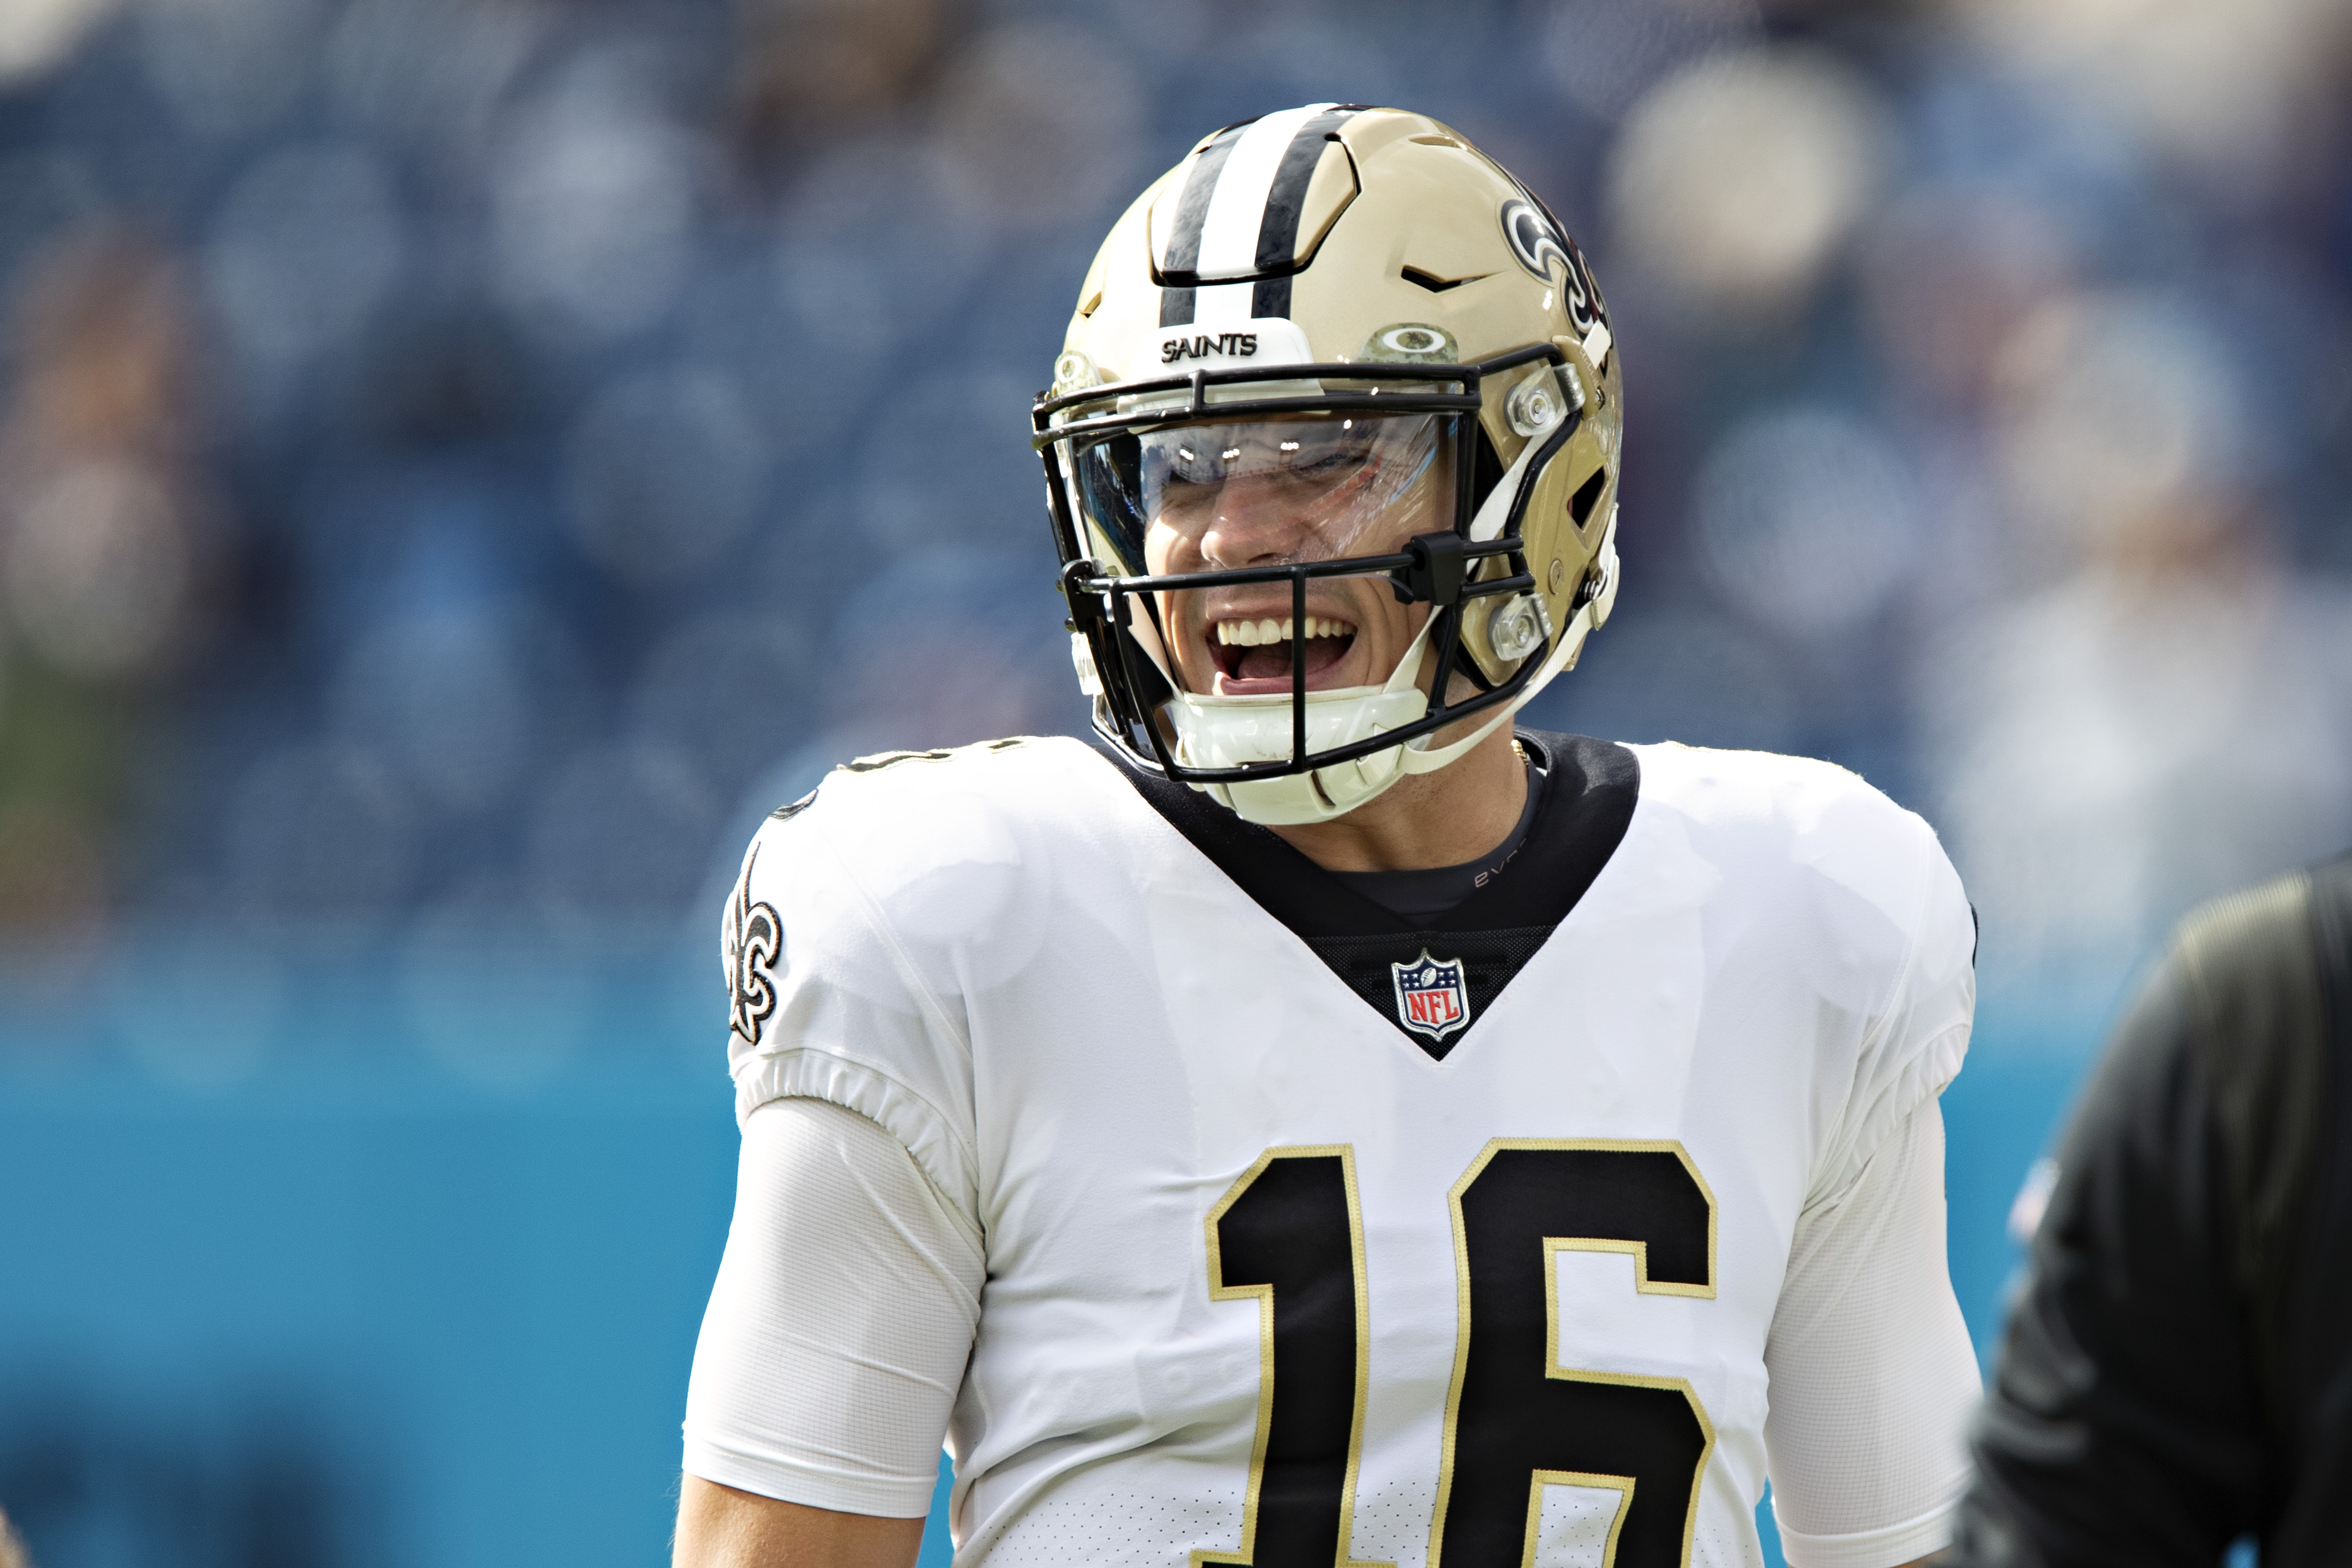 Former Notre Dame QB Ian Book playing for the Saints